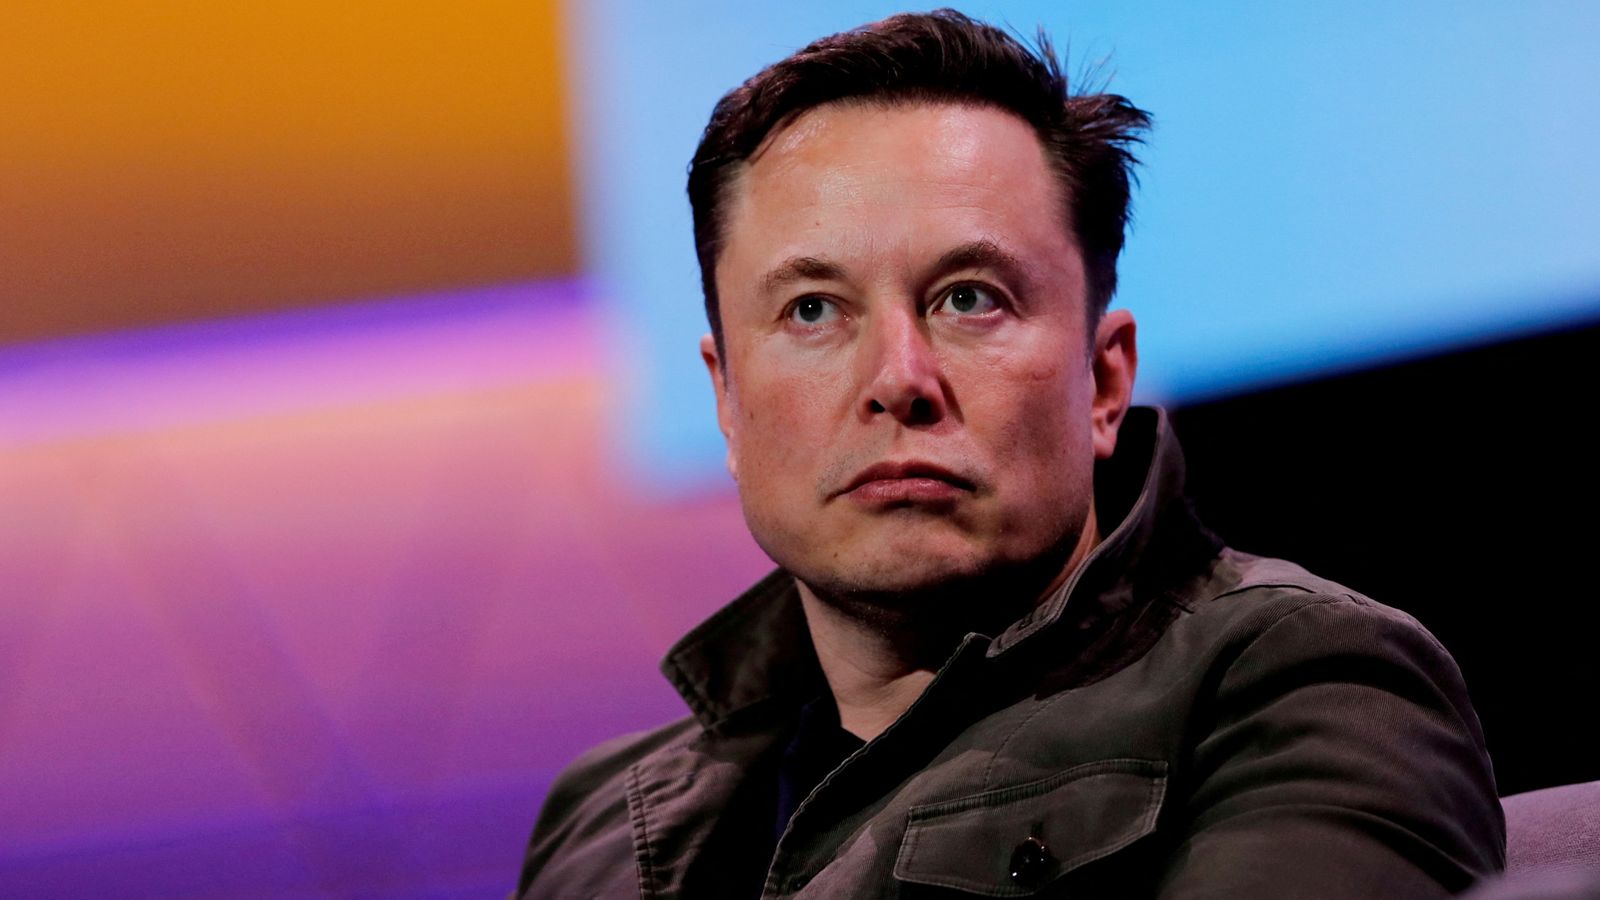 Elon Musk on artificial intelligence: "If we don't stop now, we risk epochal upheavals"